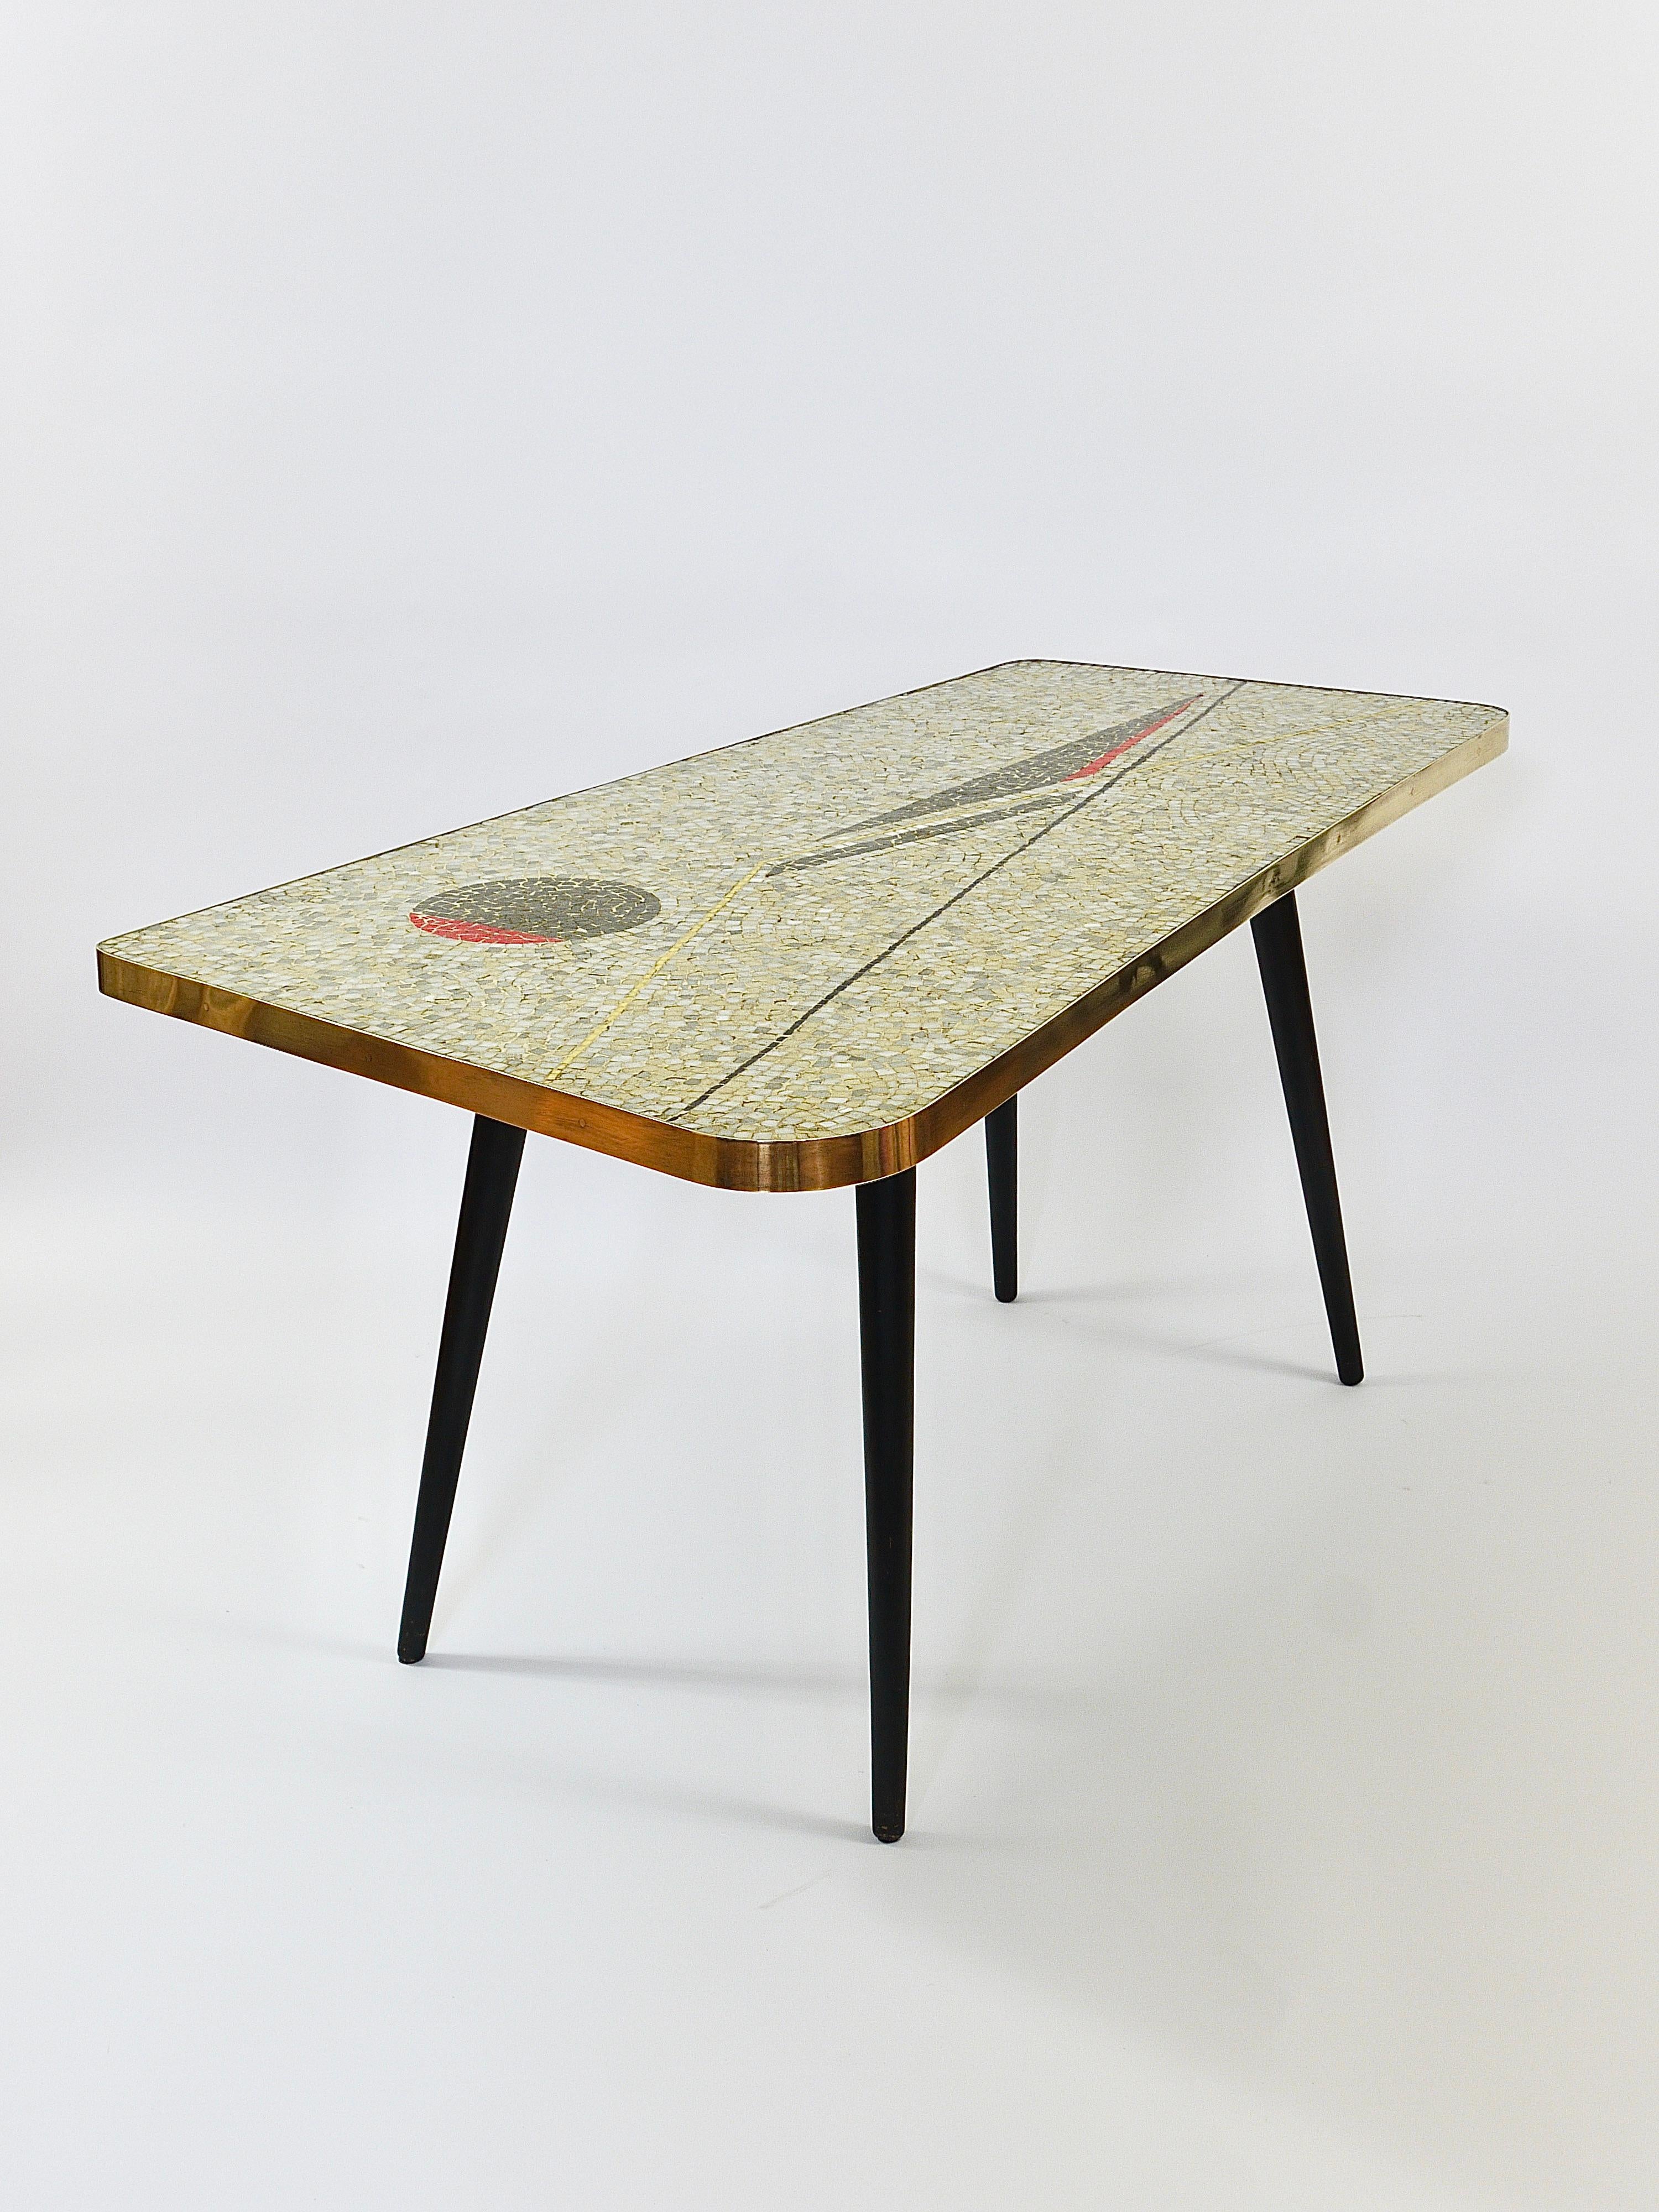 Berthold Muller Asymmetrical Mosaic Tile Coffee or Sofa Table, Germany, 1950s In Good Condition For Sale In Vienna, AT